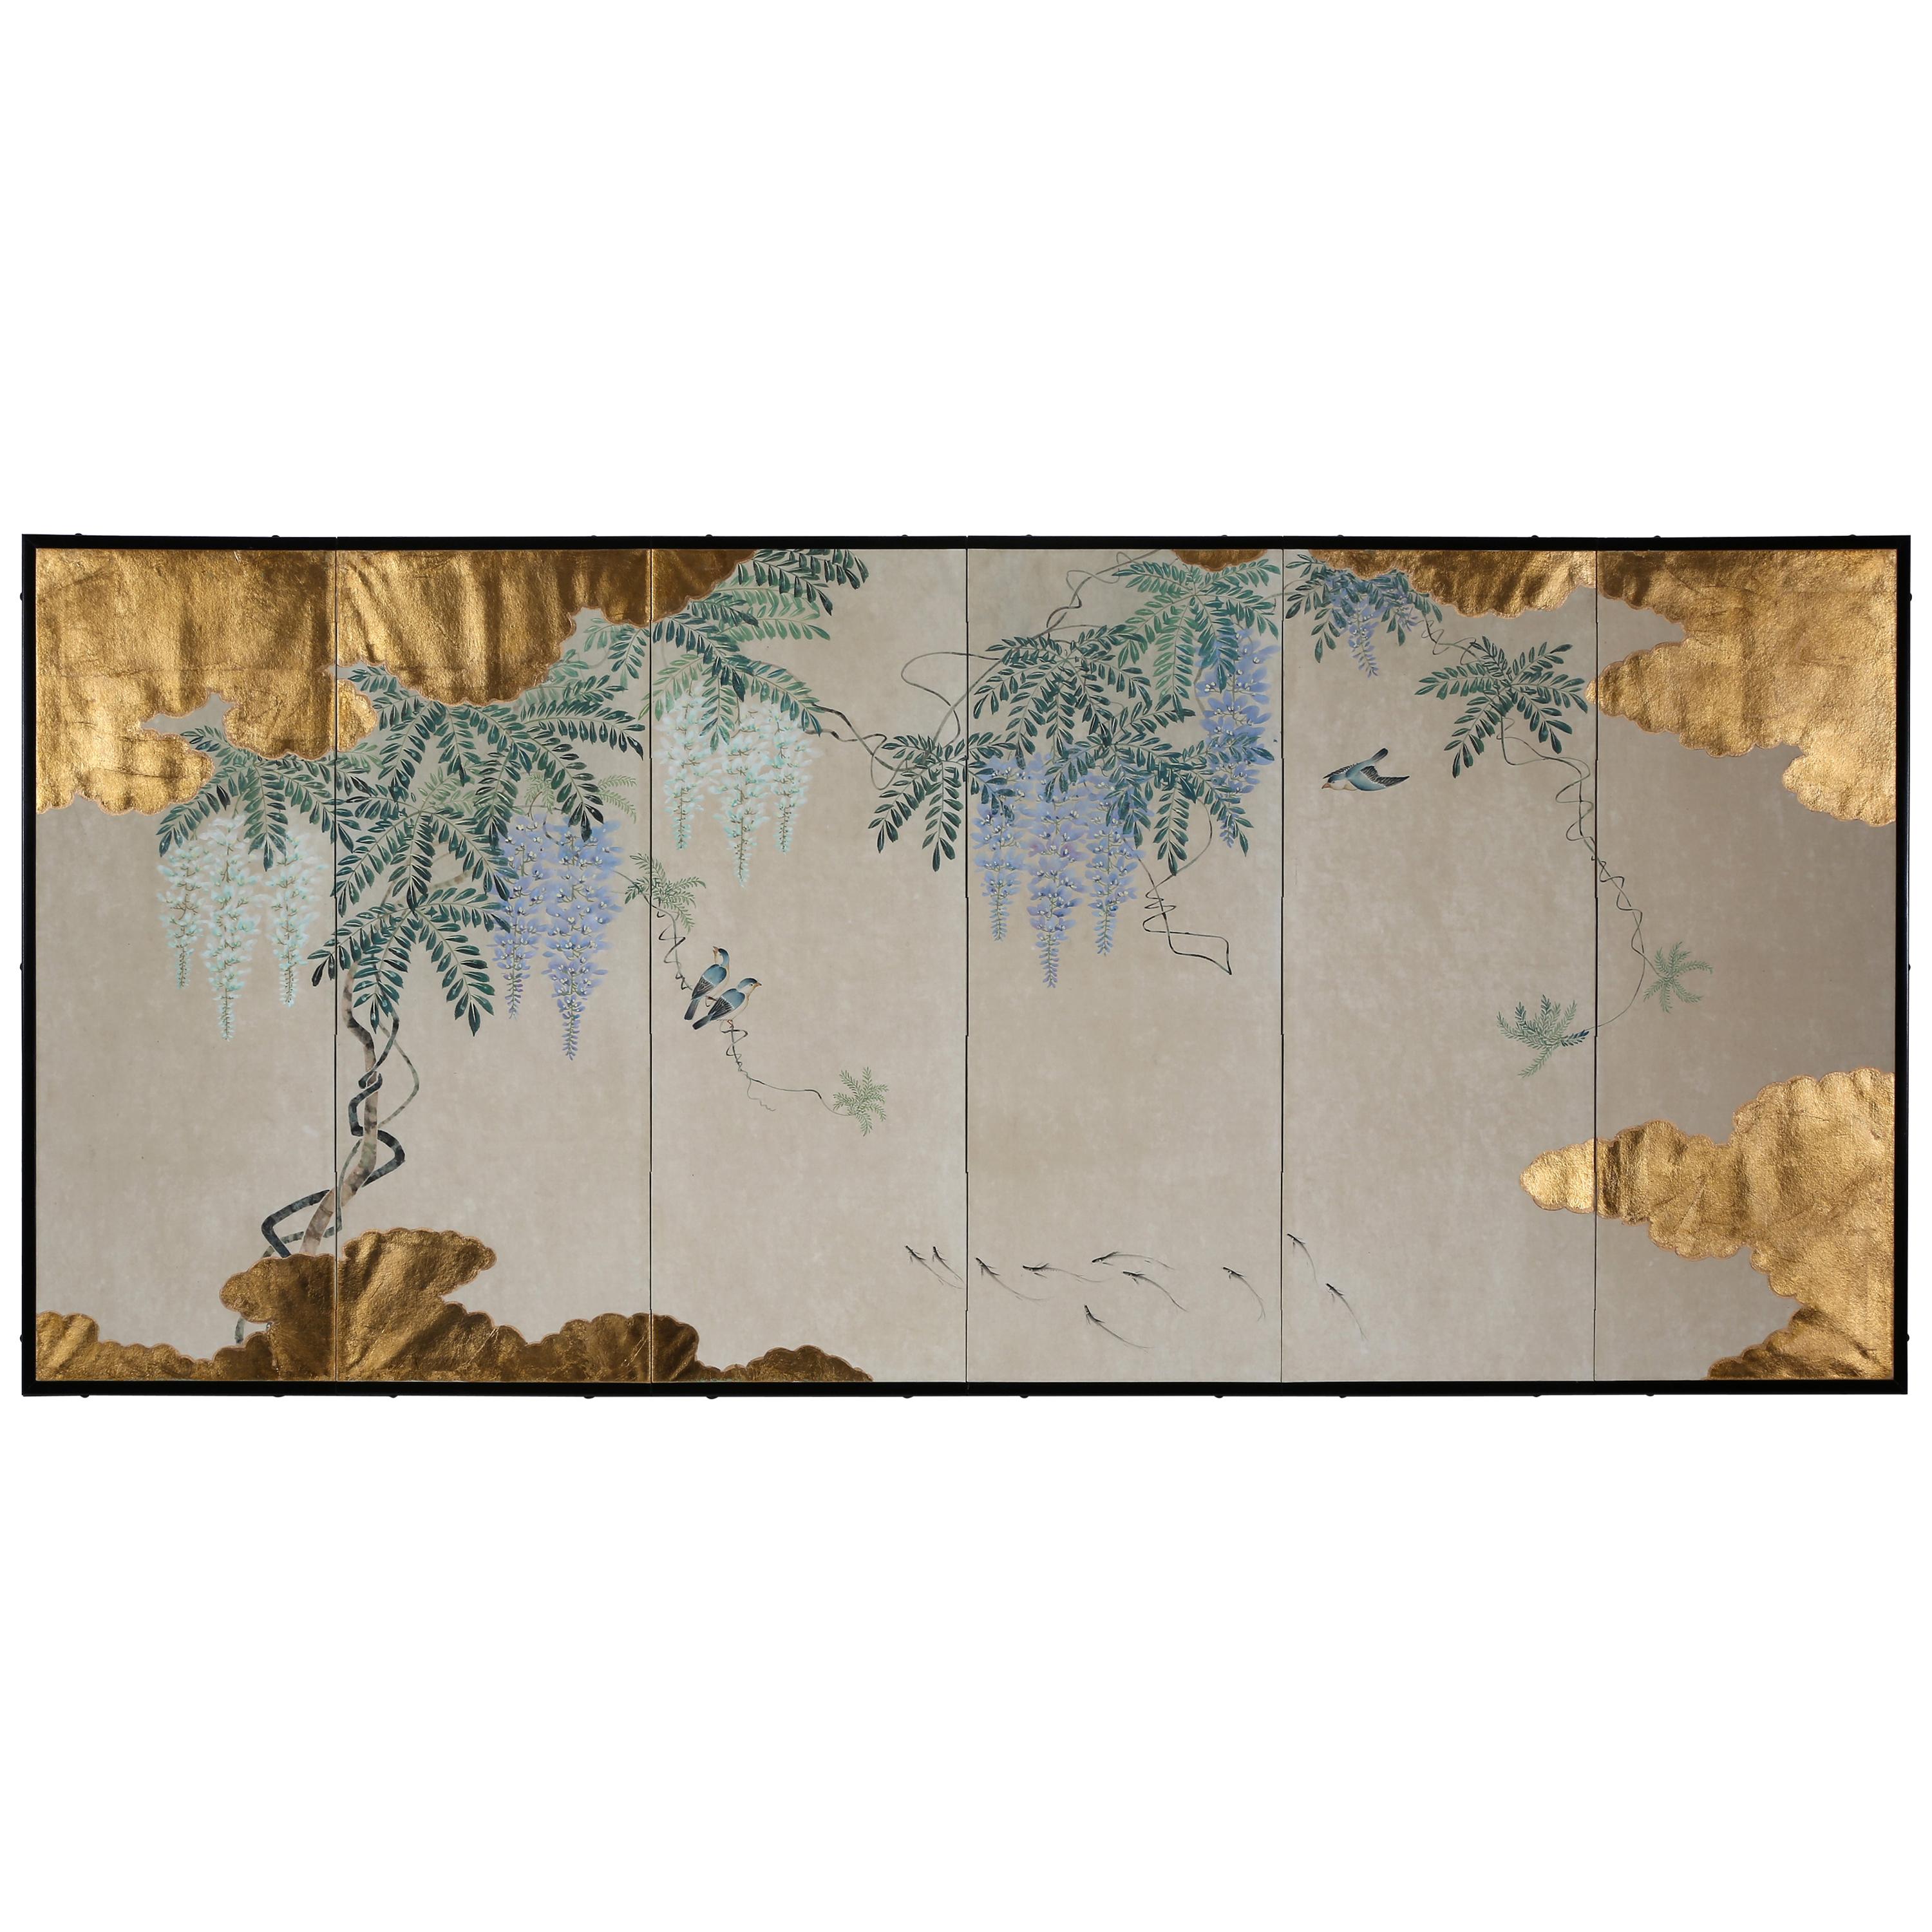 Hand Painted Japanese Folding Screen Byobu of Wisteria by the Pond